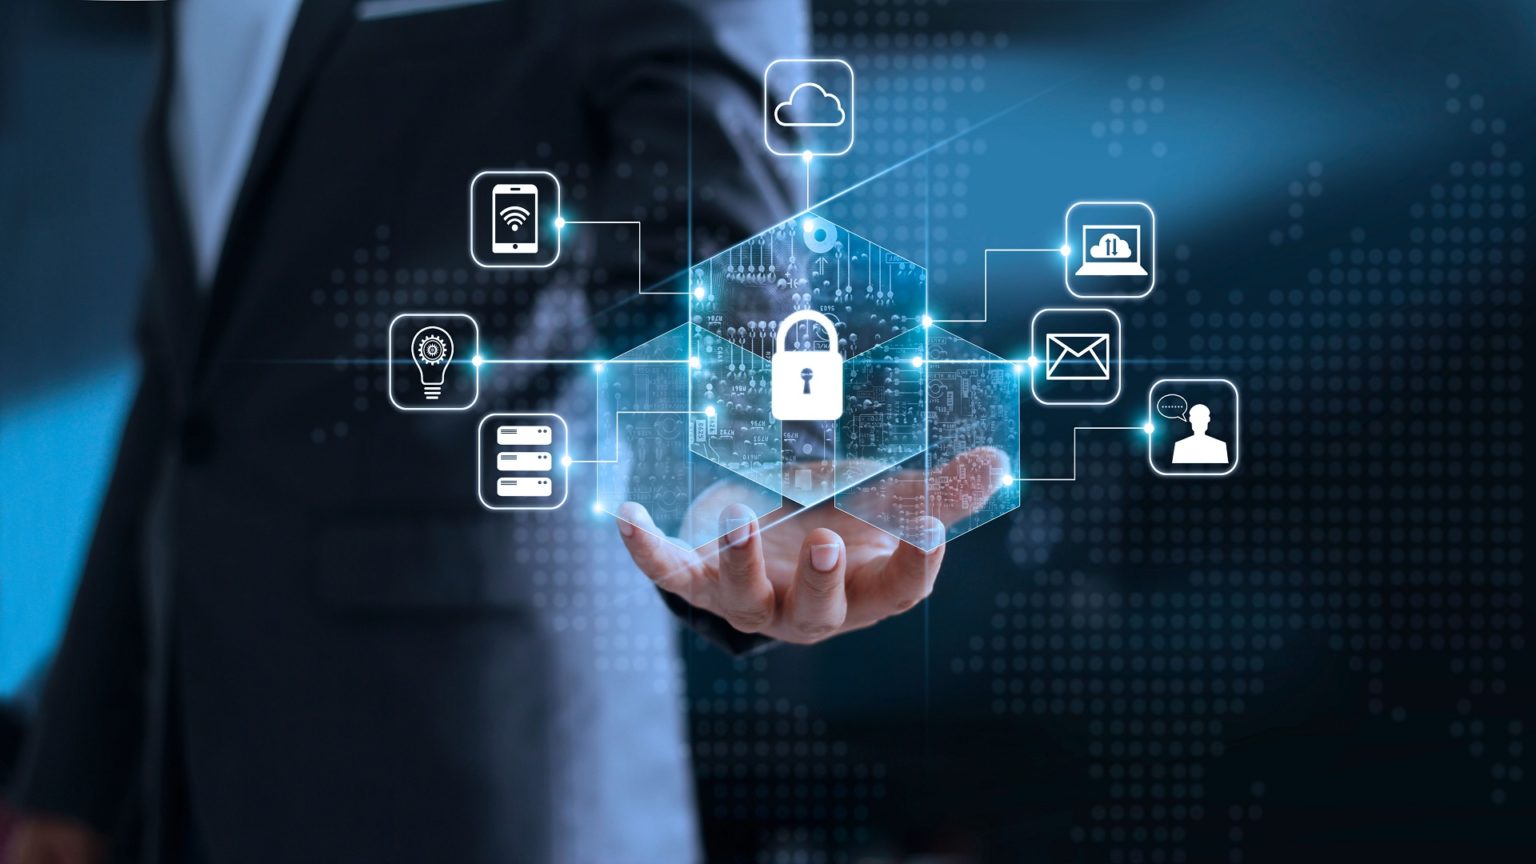 Data protection privacy concept. GDPR. EU. Cyber security network. Business man protecting his data personal information. Padlock icon and internet technology networking connection on virtual interface blue background.